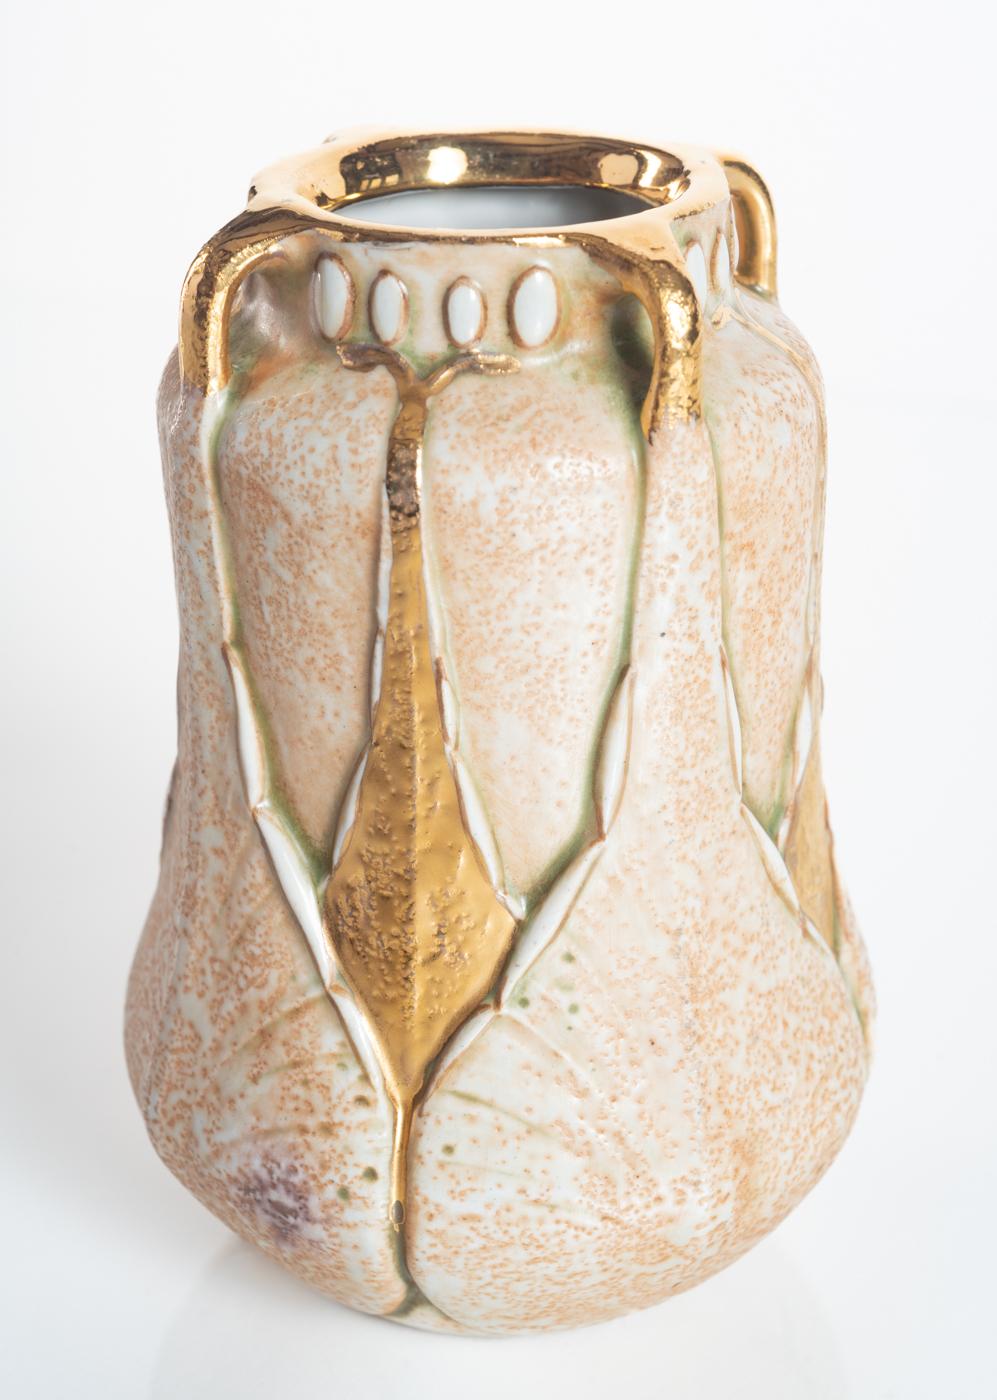 Delicate textured vase featuring geometric gingko leaves in a repeating pattern, with gold gilt arms and mouth. Ernst Wahliss vase with a design attributed to Paul Dachsel. 

Already well established throughout Europe as a retailer of porcelain